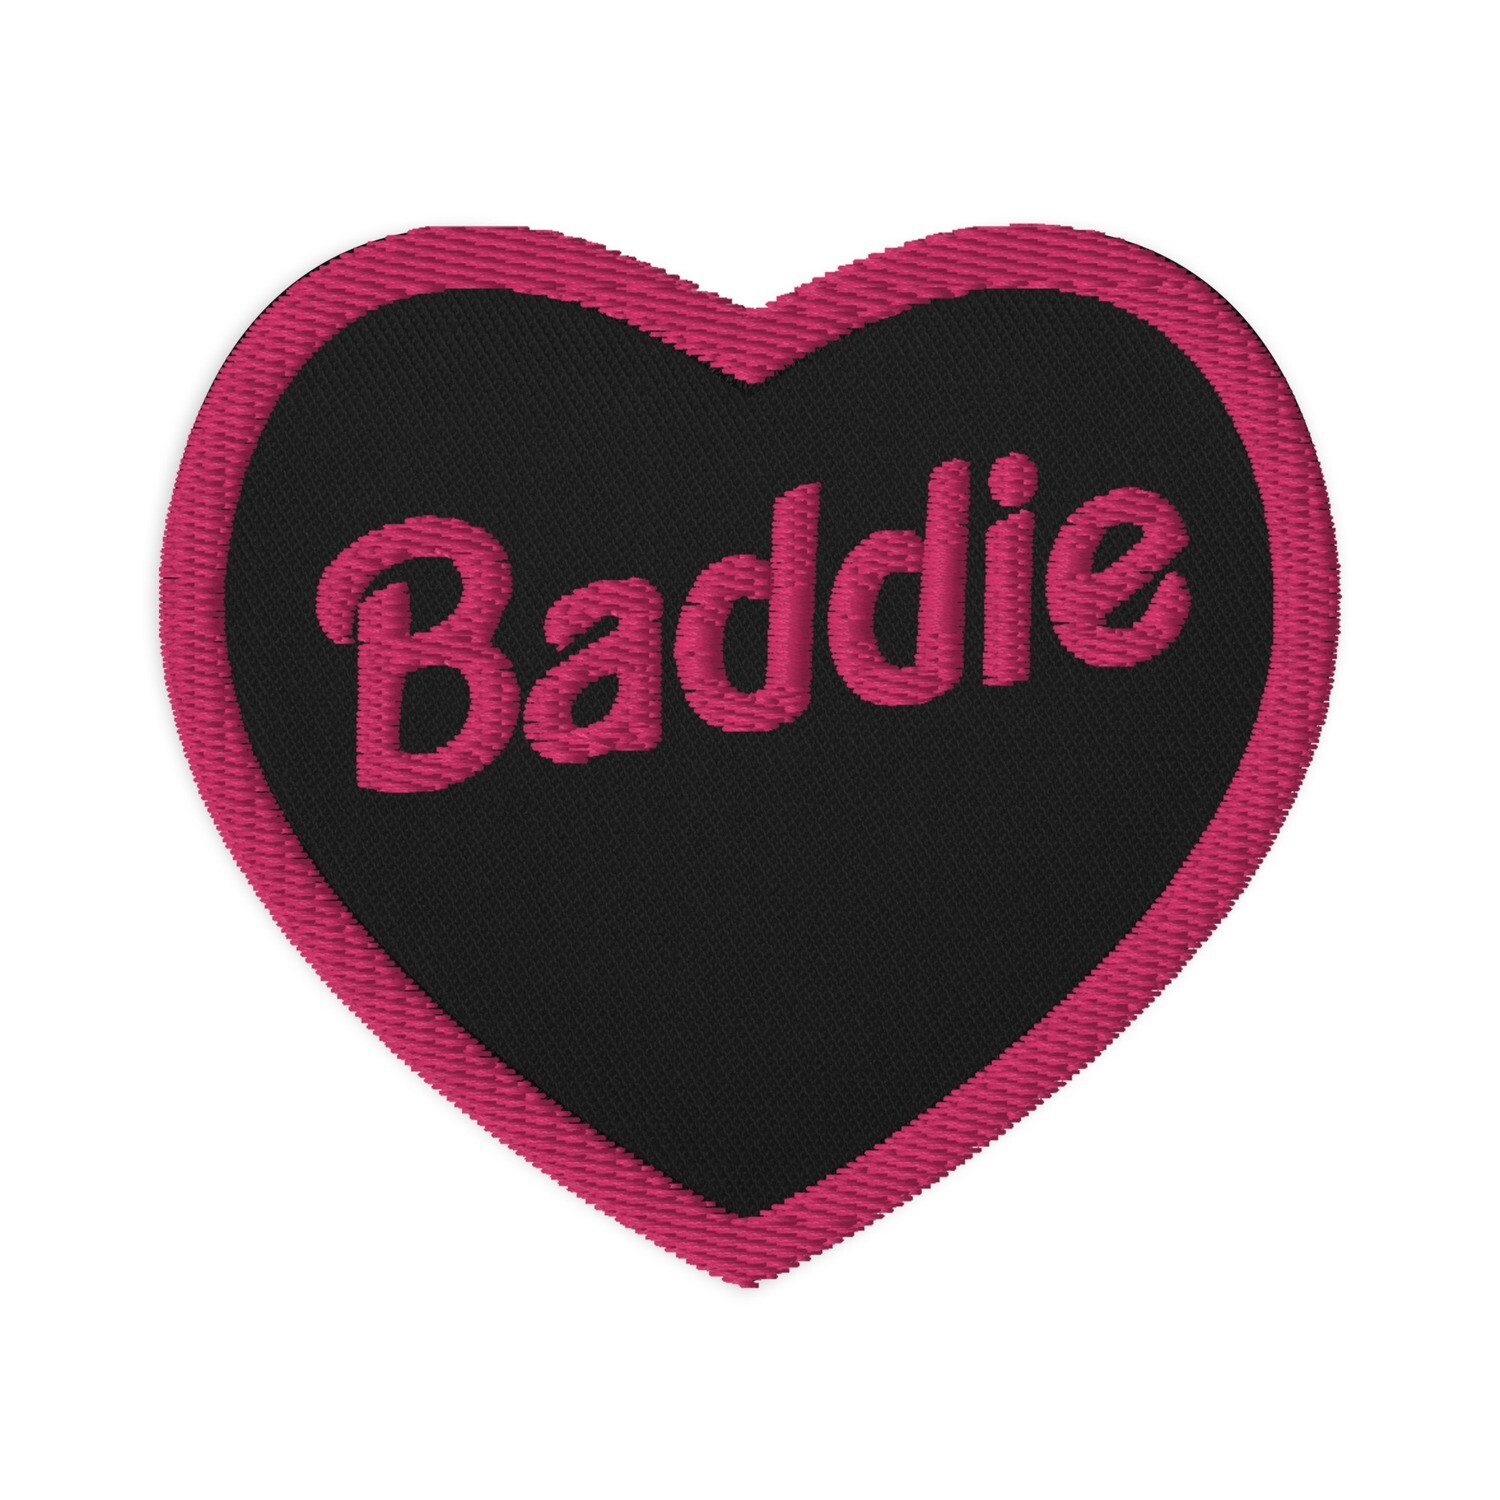 Baddie Embroidered patches